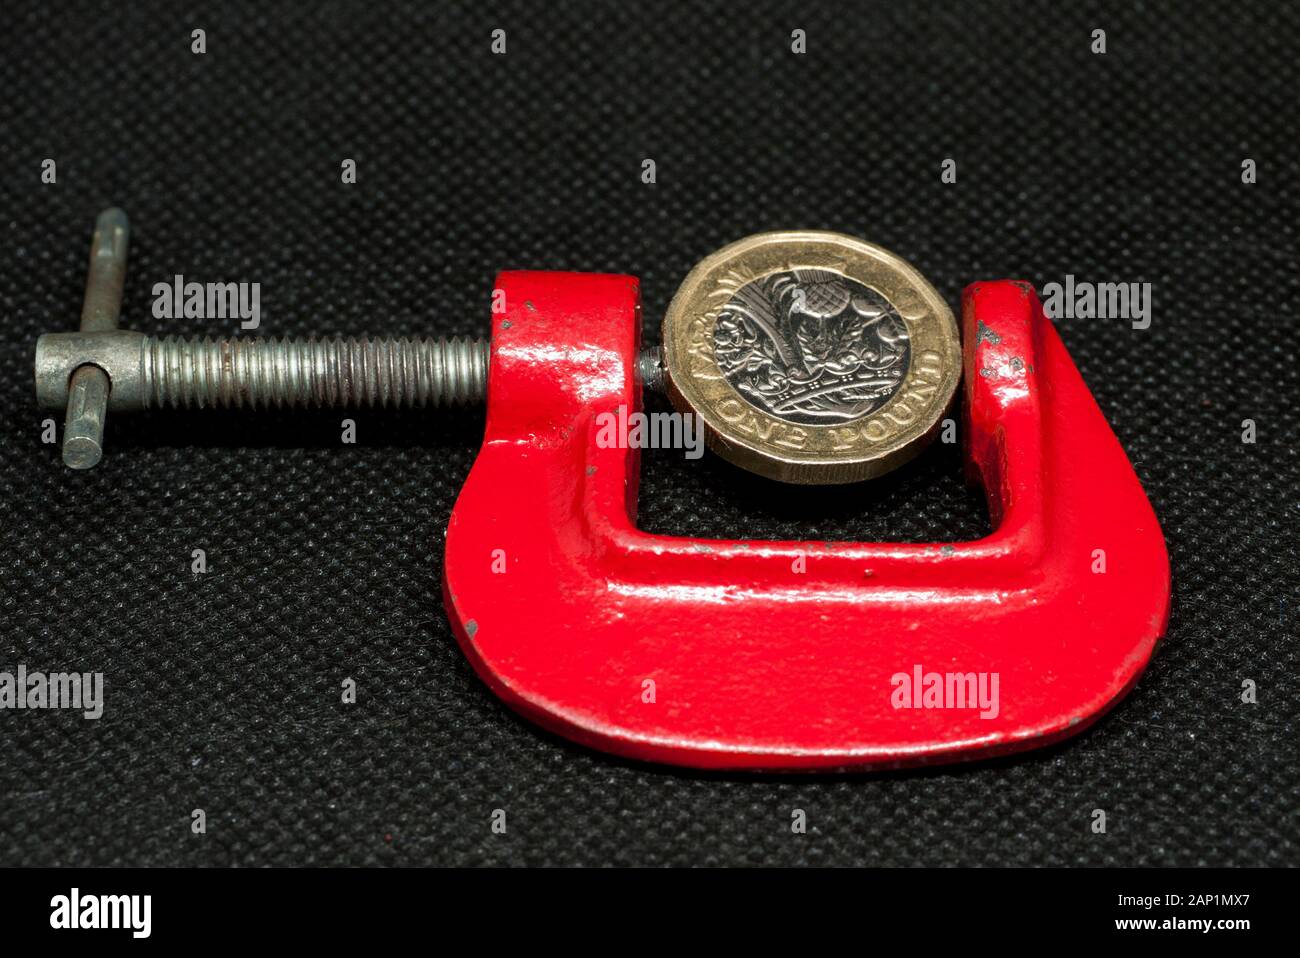 One Pound British Coin in a C Clamp, Uk. Stock Photo